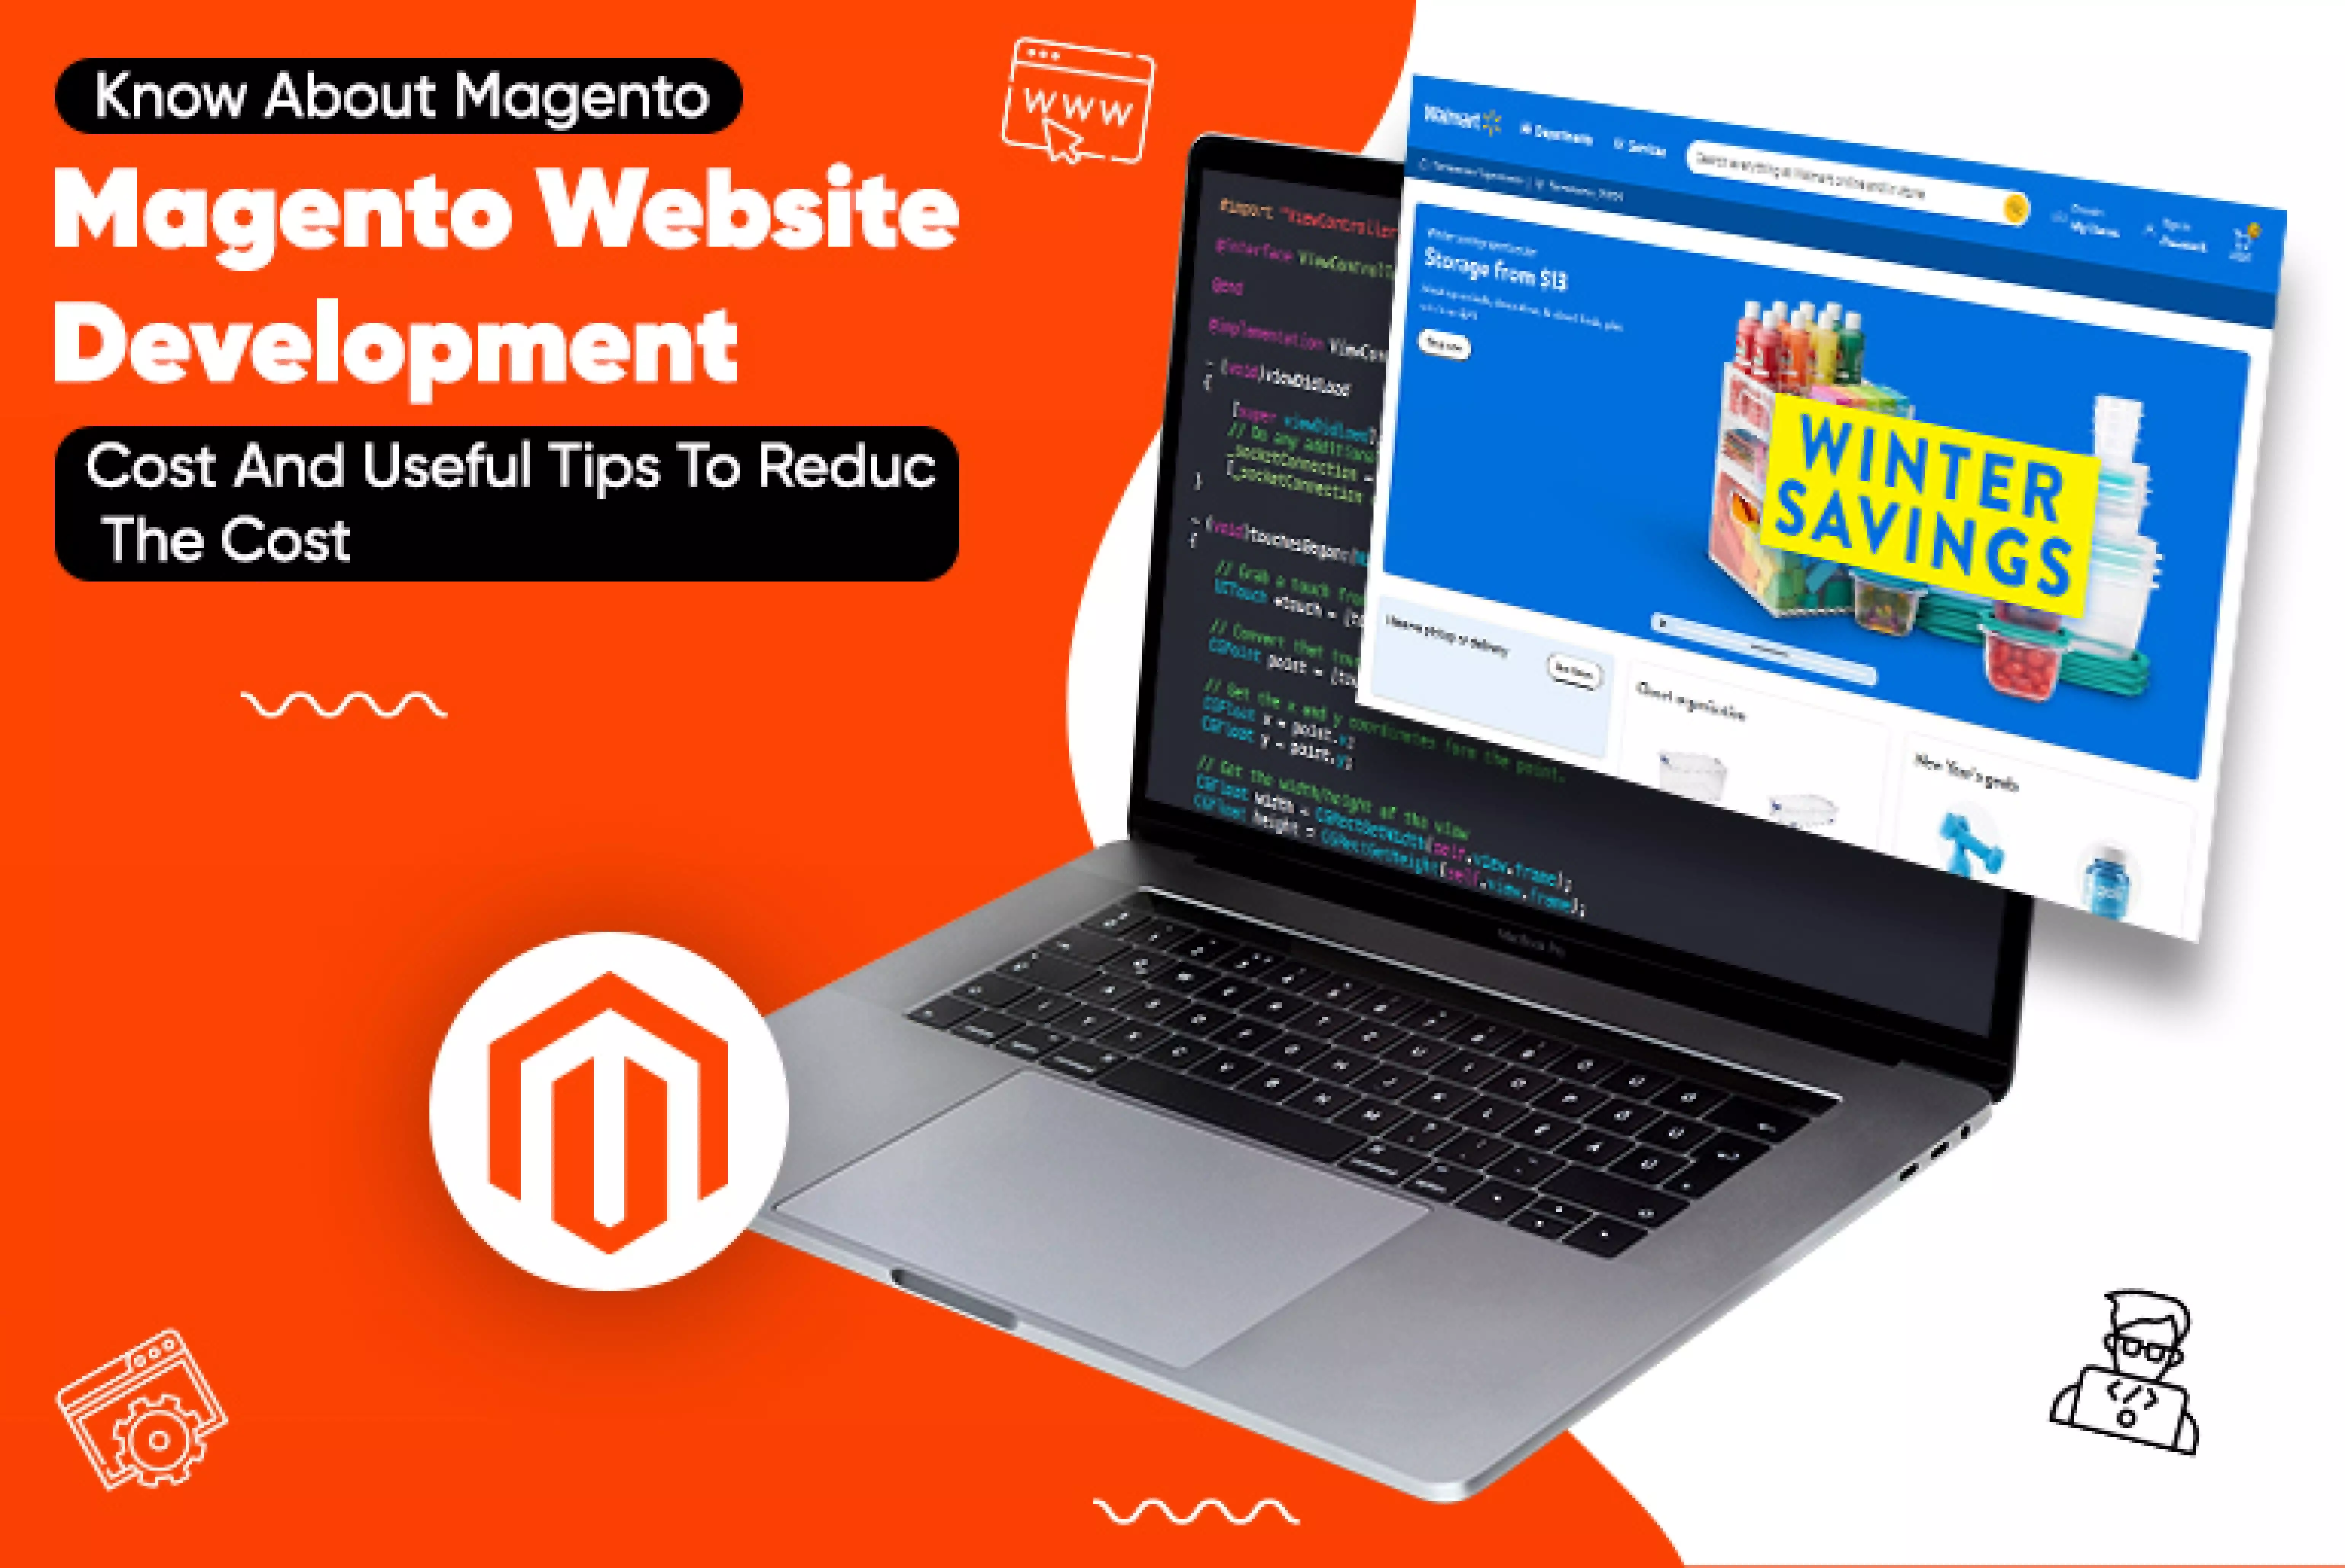 Know About Magento Website Development Cost And Useful Tips To Reduce The Cost_Thum